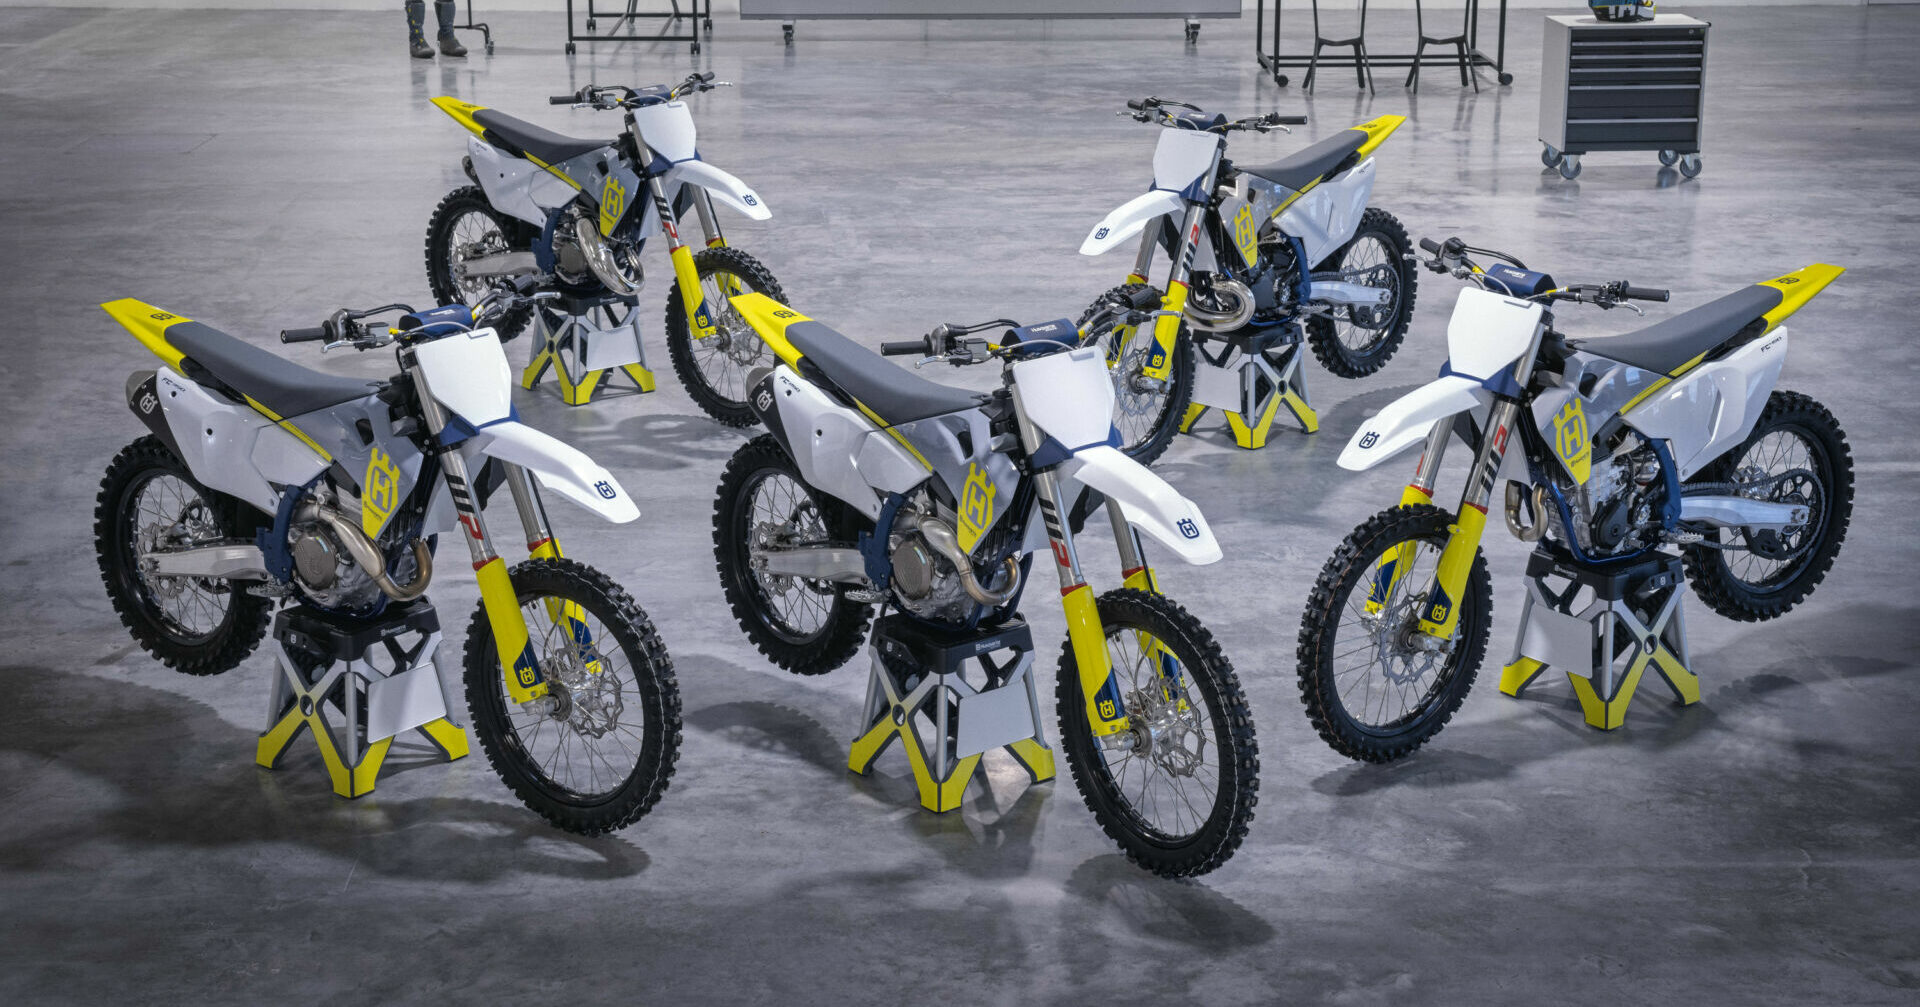 2023 Husqvarna motorcycles (clockwise from left): FC 350, TC 125, TC 250, FC 450, and FC 250. Photo courtesy Husqvarna Motorcycles.